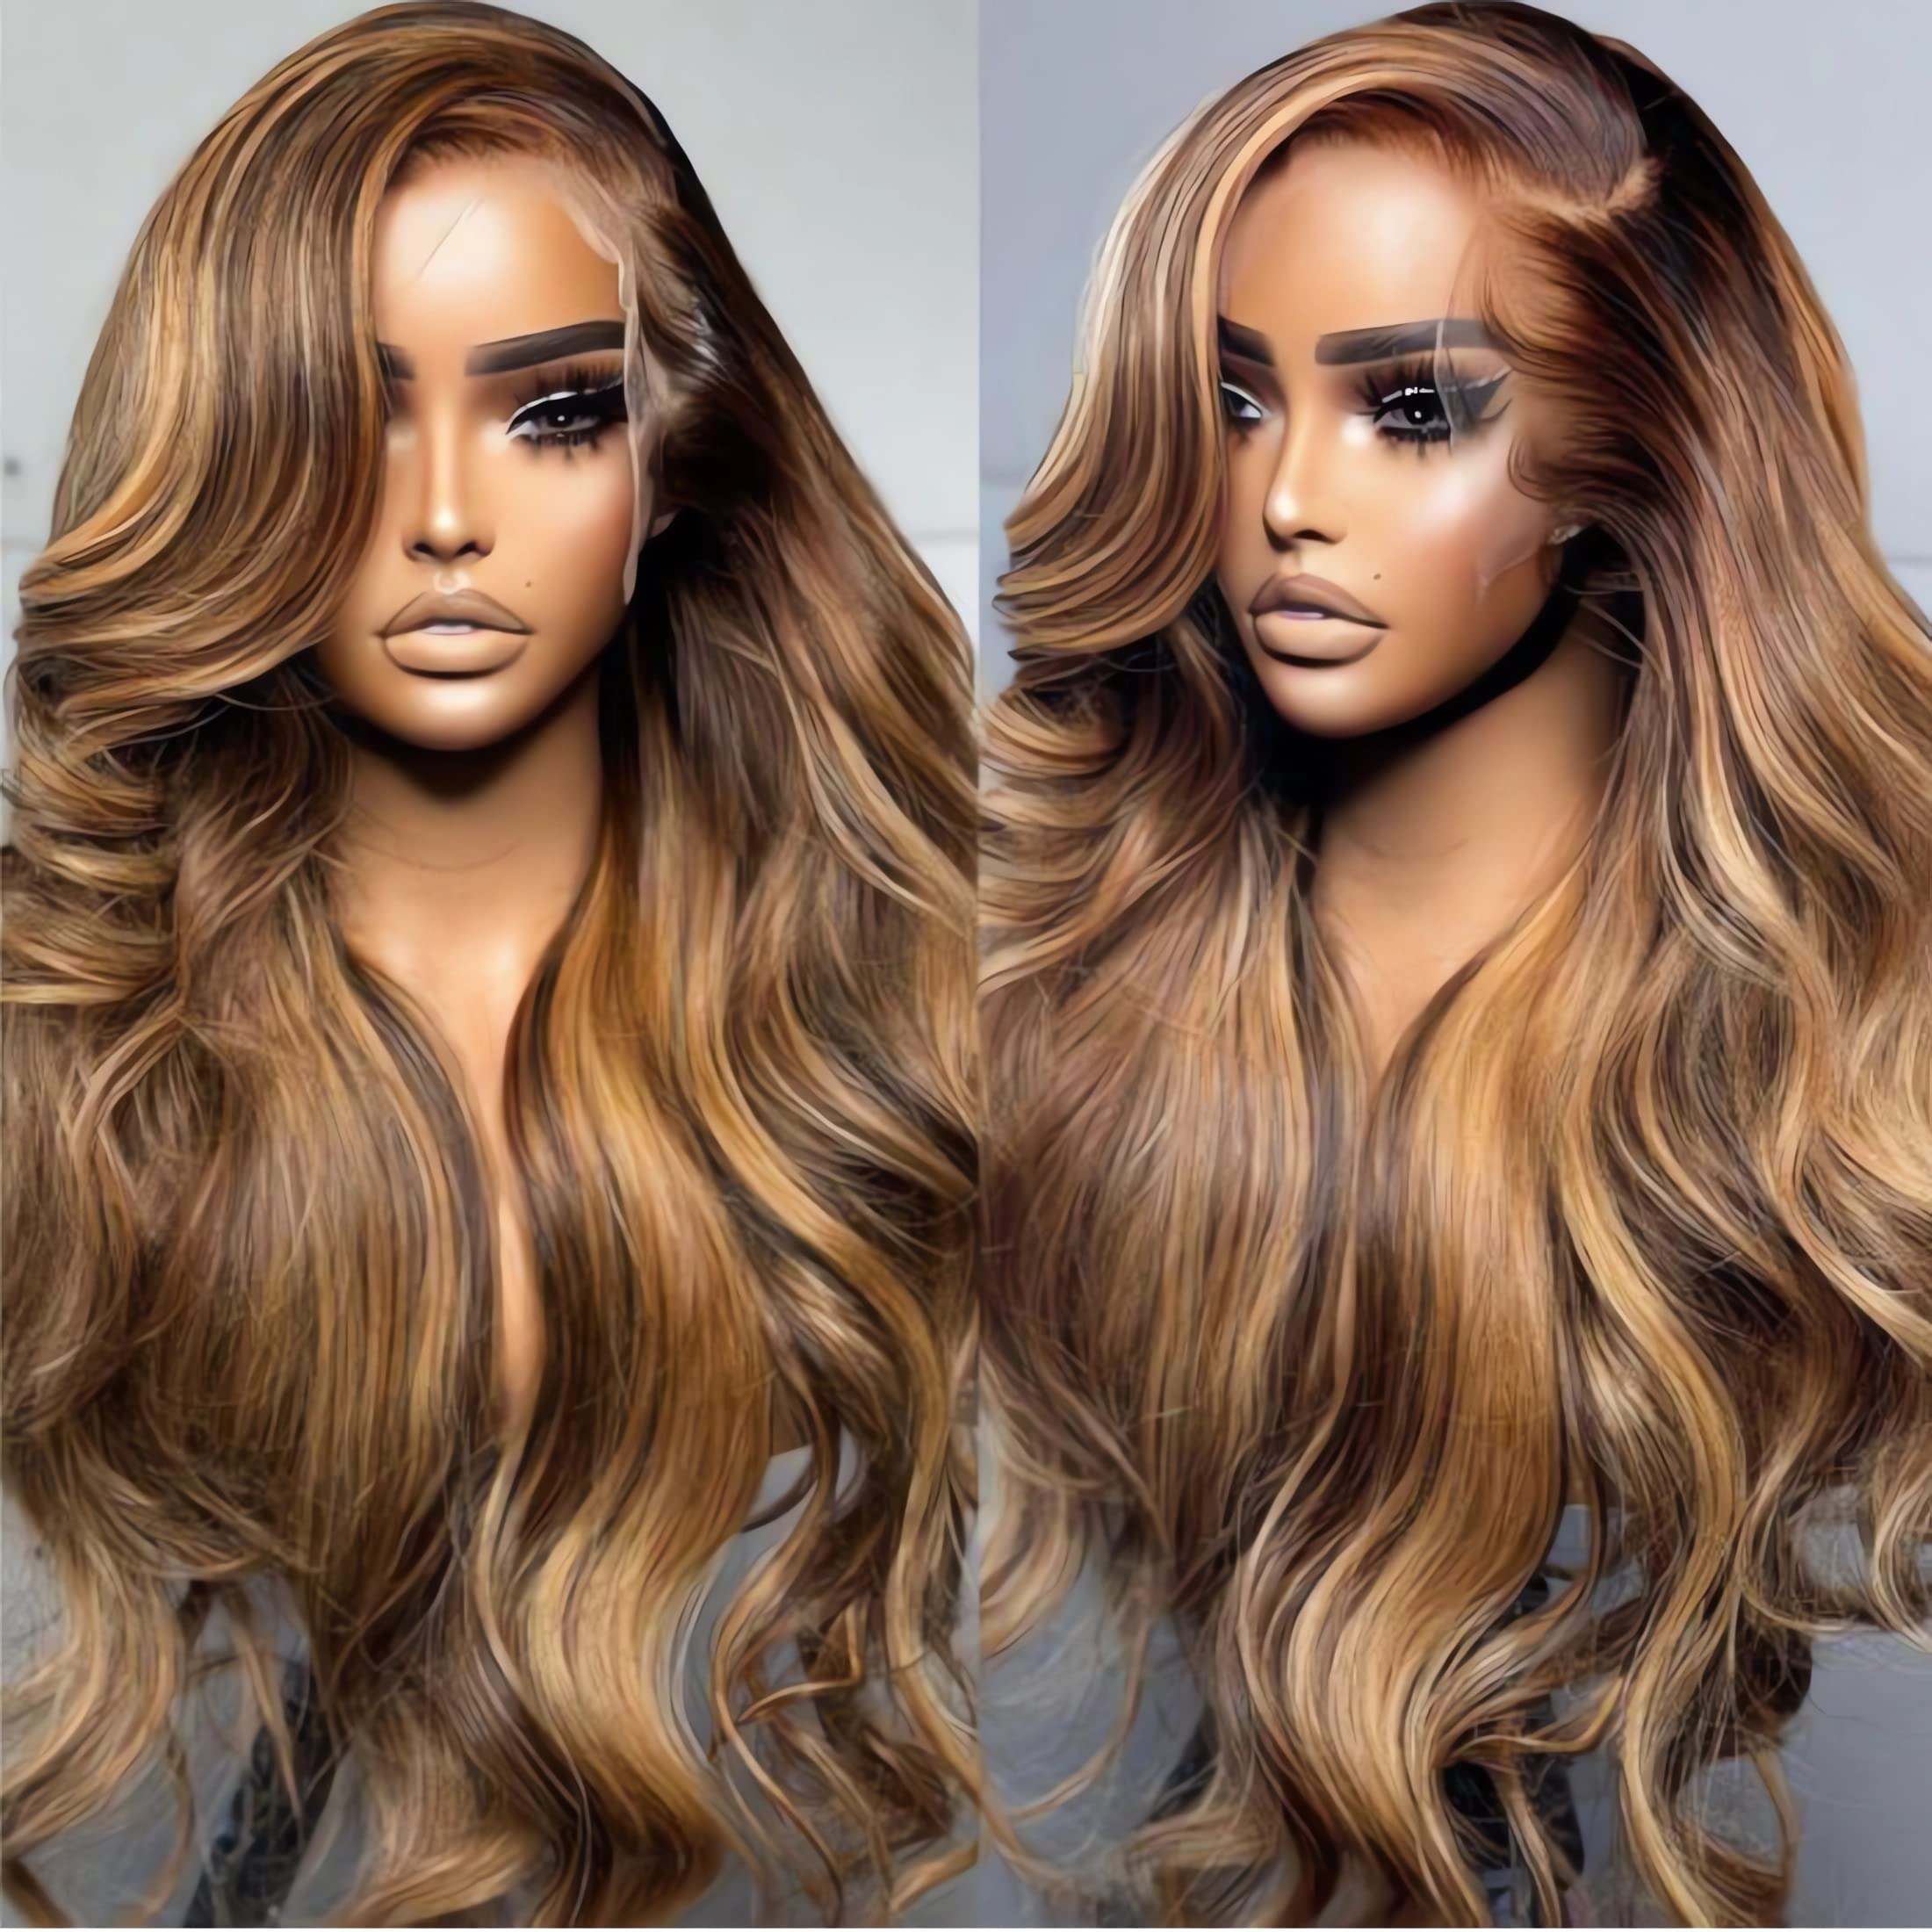 UNIcE 28Inch Ombre Highlight 13x4 Lace Front Human Hair Wig Body Wave Brown Blonde TL412 color, Brazilian Remy Hair Lace Frontal